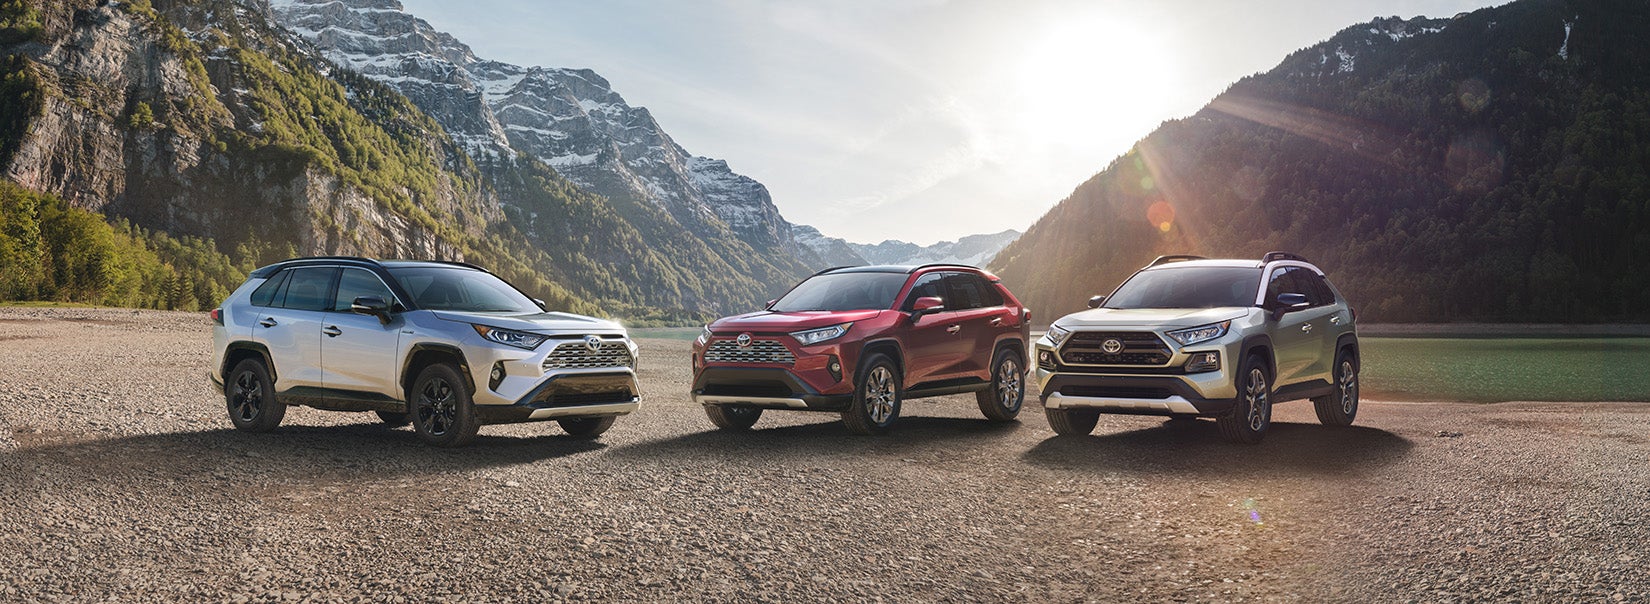 A Hybrid for Everyone at Fiore Toyota | three toyota RAV4 parked on road